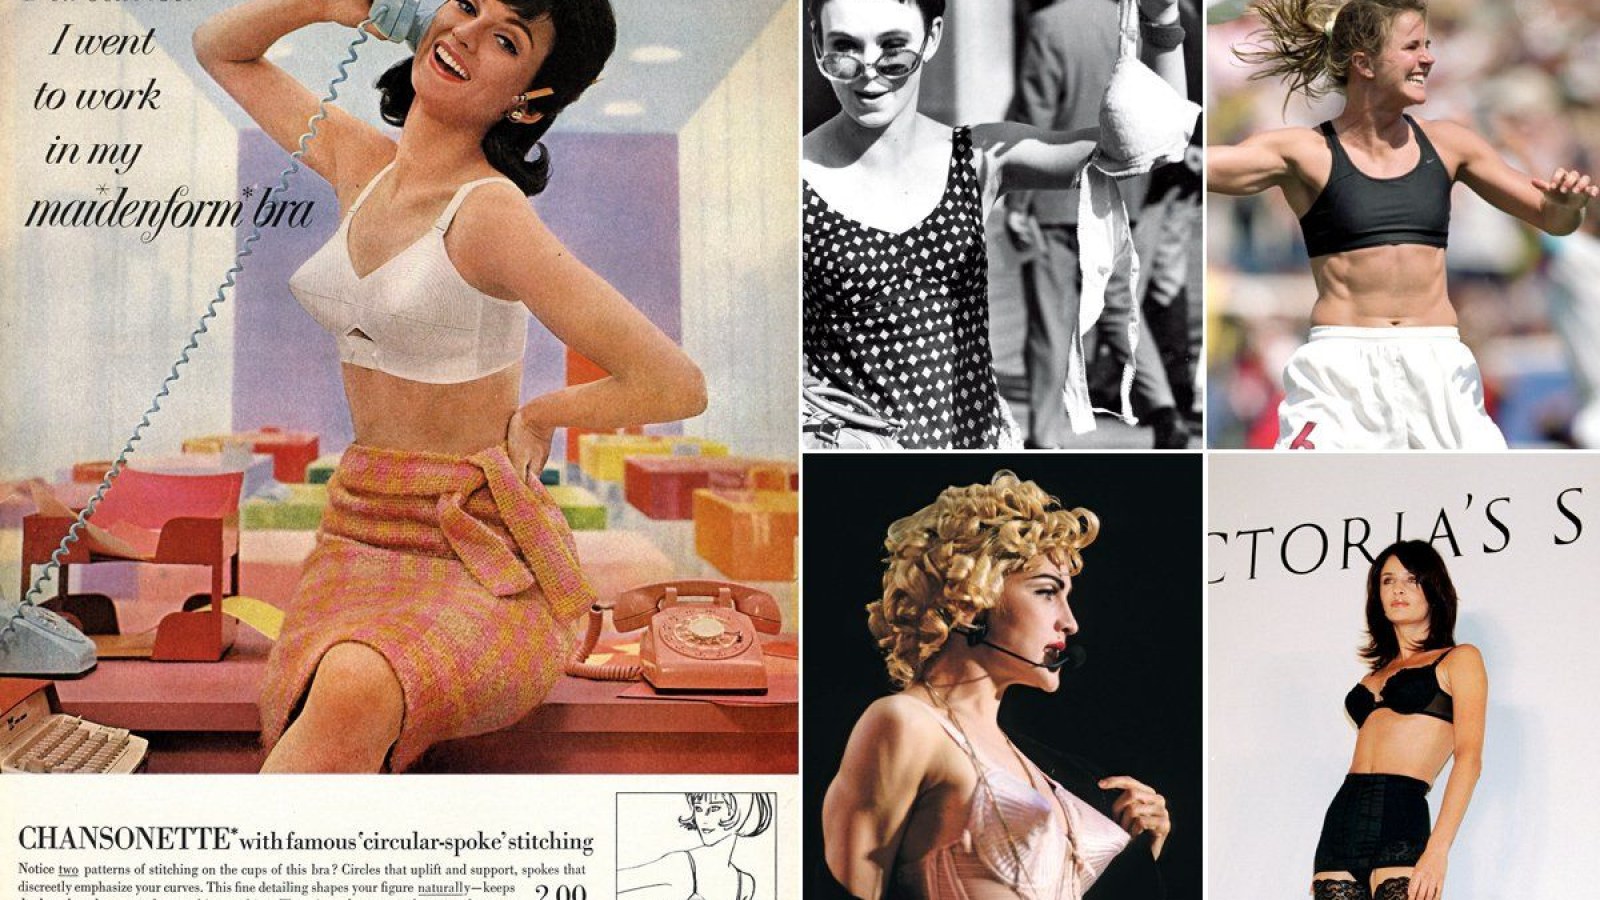 Women's News: Vintage Bras From The 1950s Put Madonna's Cone Bras